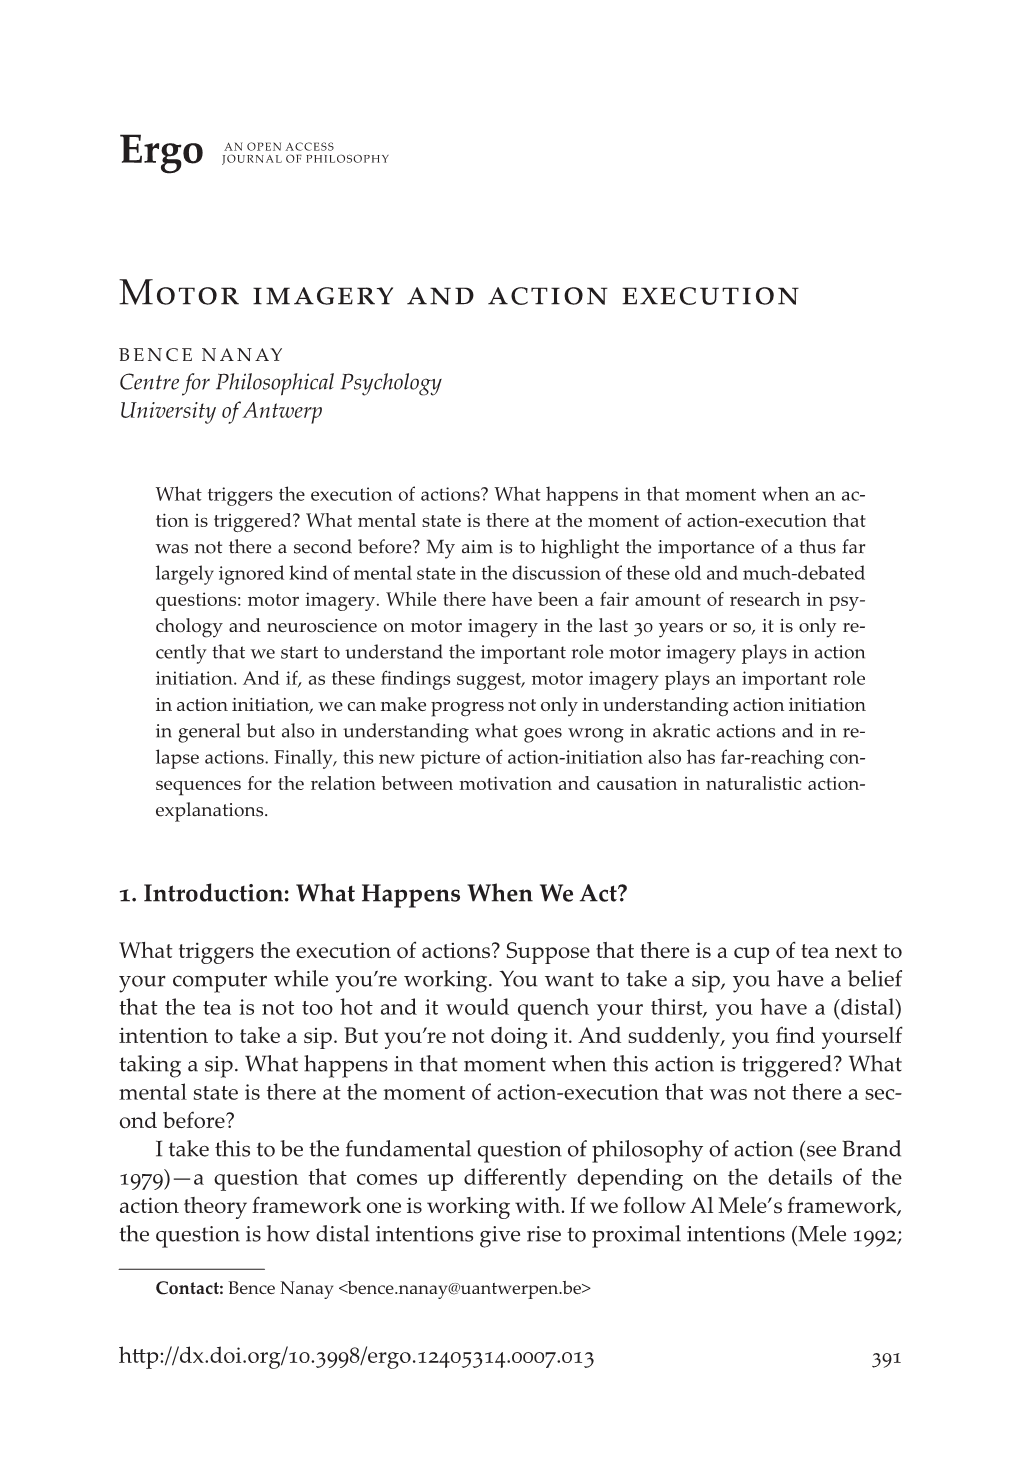 Motor Imagery and Action Execution